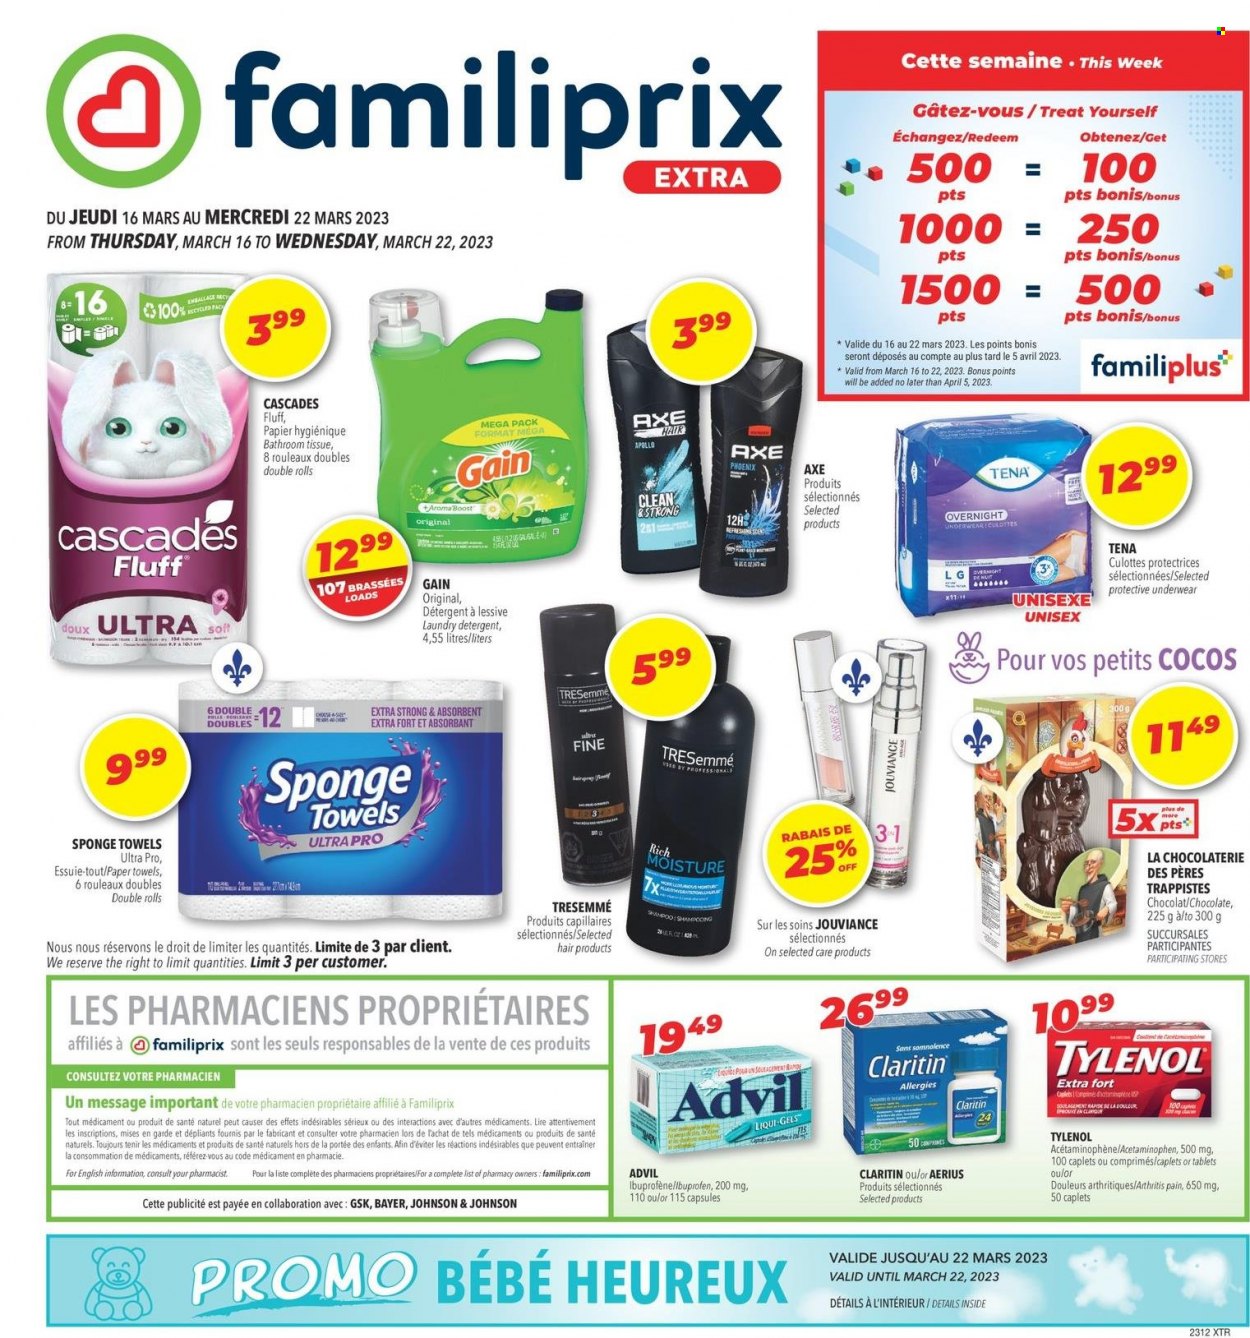 thumbnail - Familiprix Extra Flyer - March 16, 2023 - March 22, 2023 - Sales products - chocolate, Mars, Boost, Johnson's, bath tissue, kitchen towels, paper towels, Gain, laundry detergent, hair products, TRESemmé, Axe, Tylenol, Ibuprofen, Advil Rapid, Bayer, underwear, detergent, shampoo. Page 1.